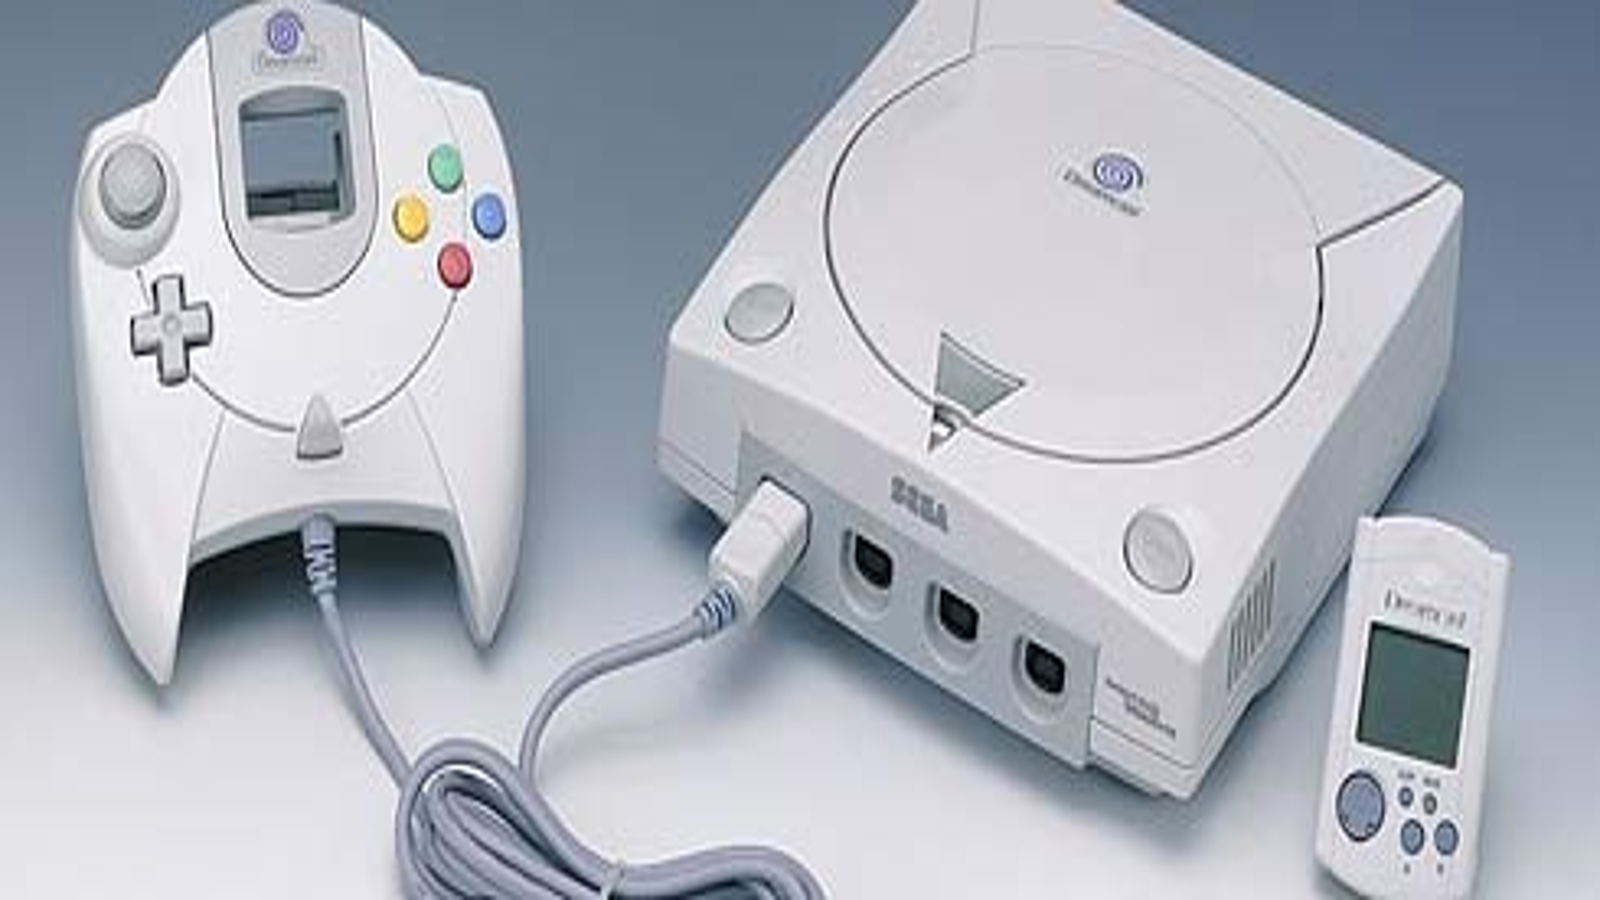 https://assetsio.gnwcdn.com/dreamcast.jpg?width=1600&height=900&fit=crop&quality=100&format=png&enable=upscale&auto=webp